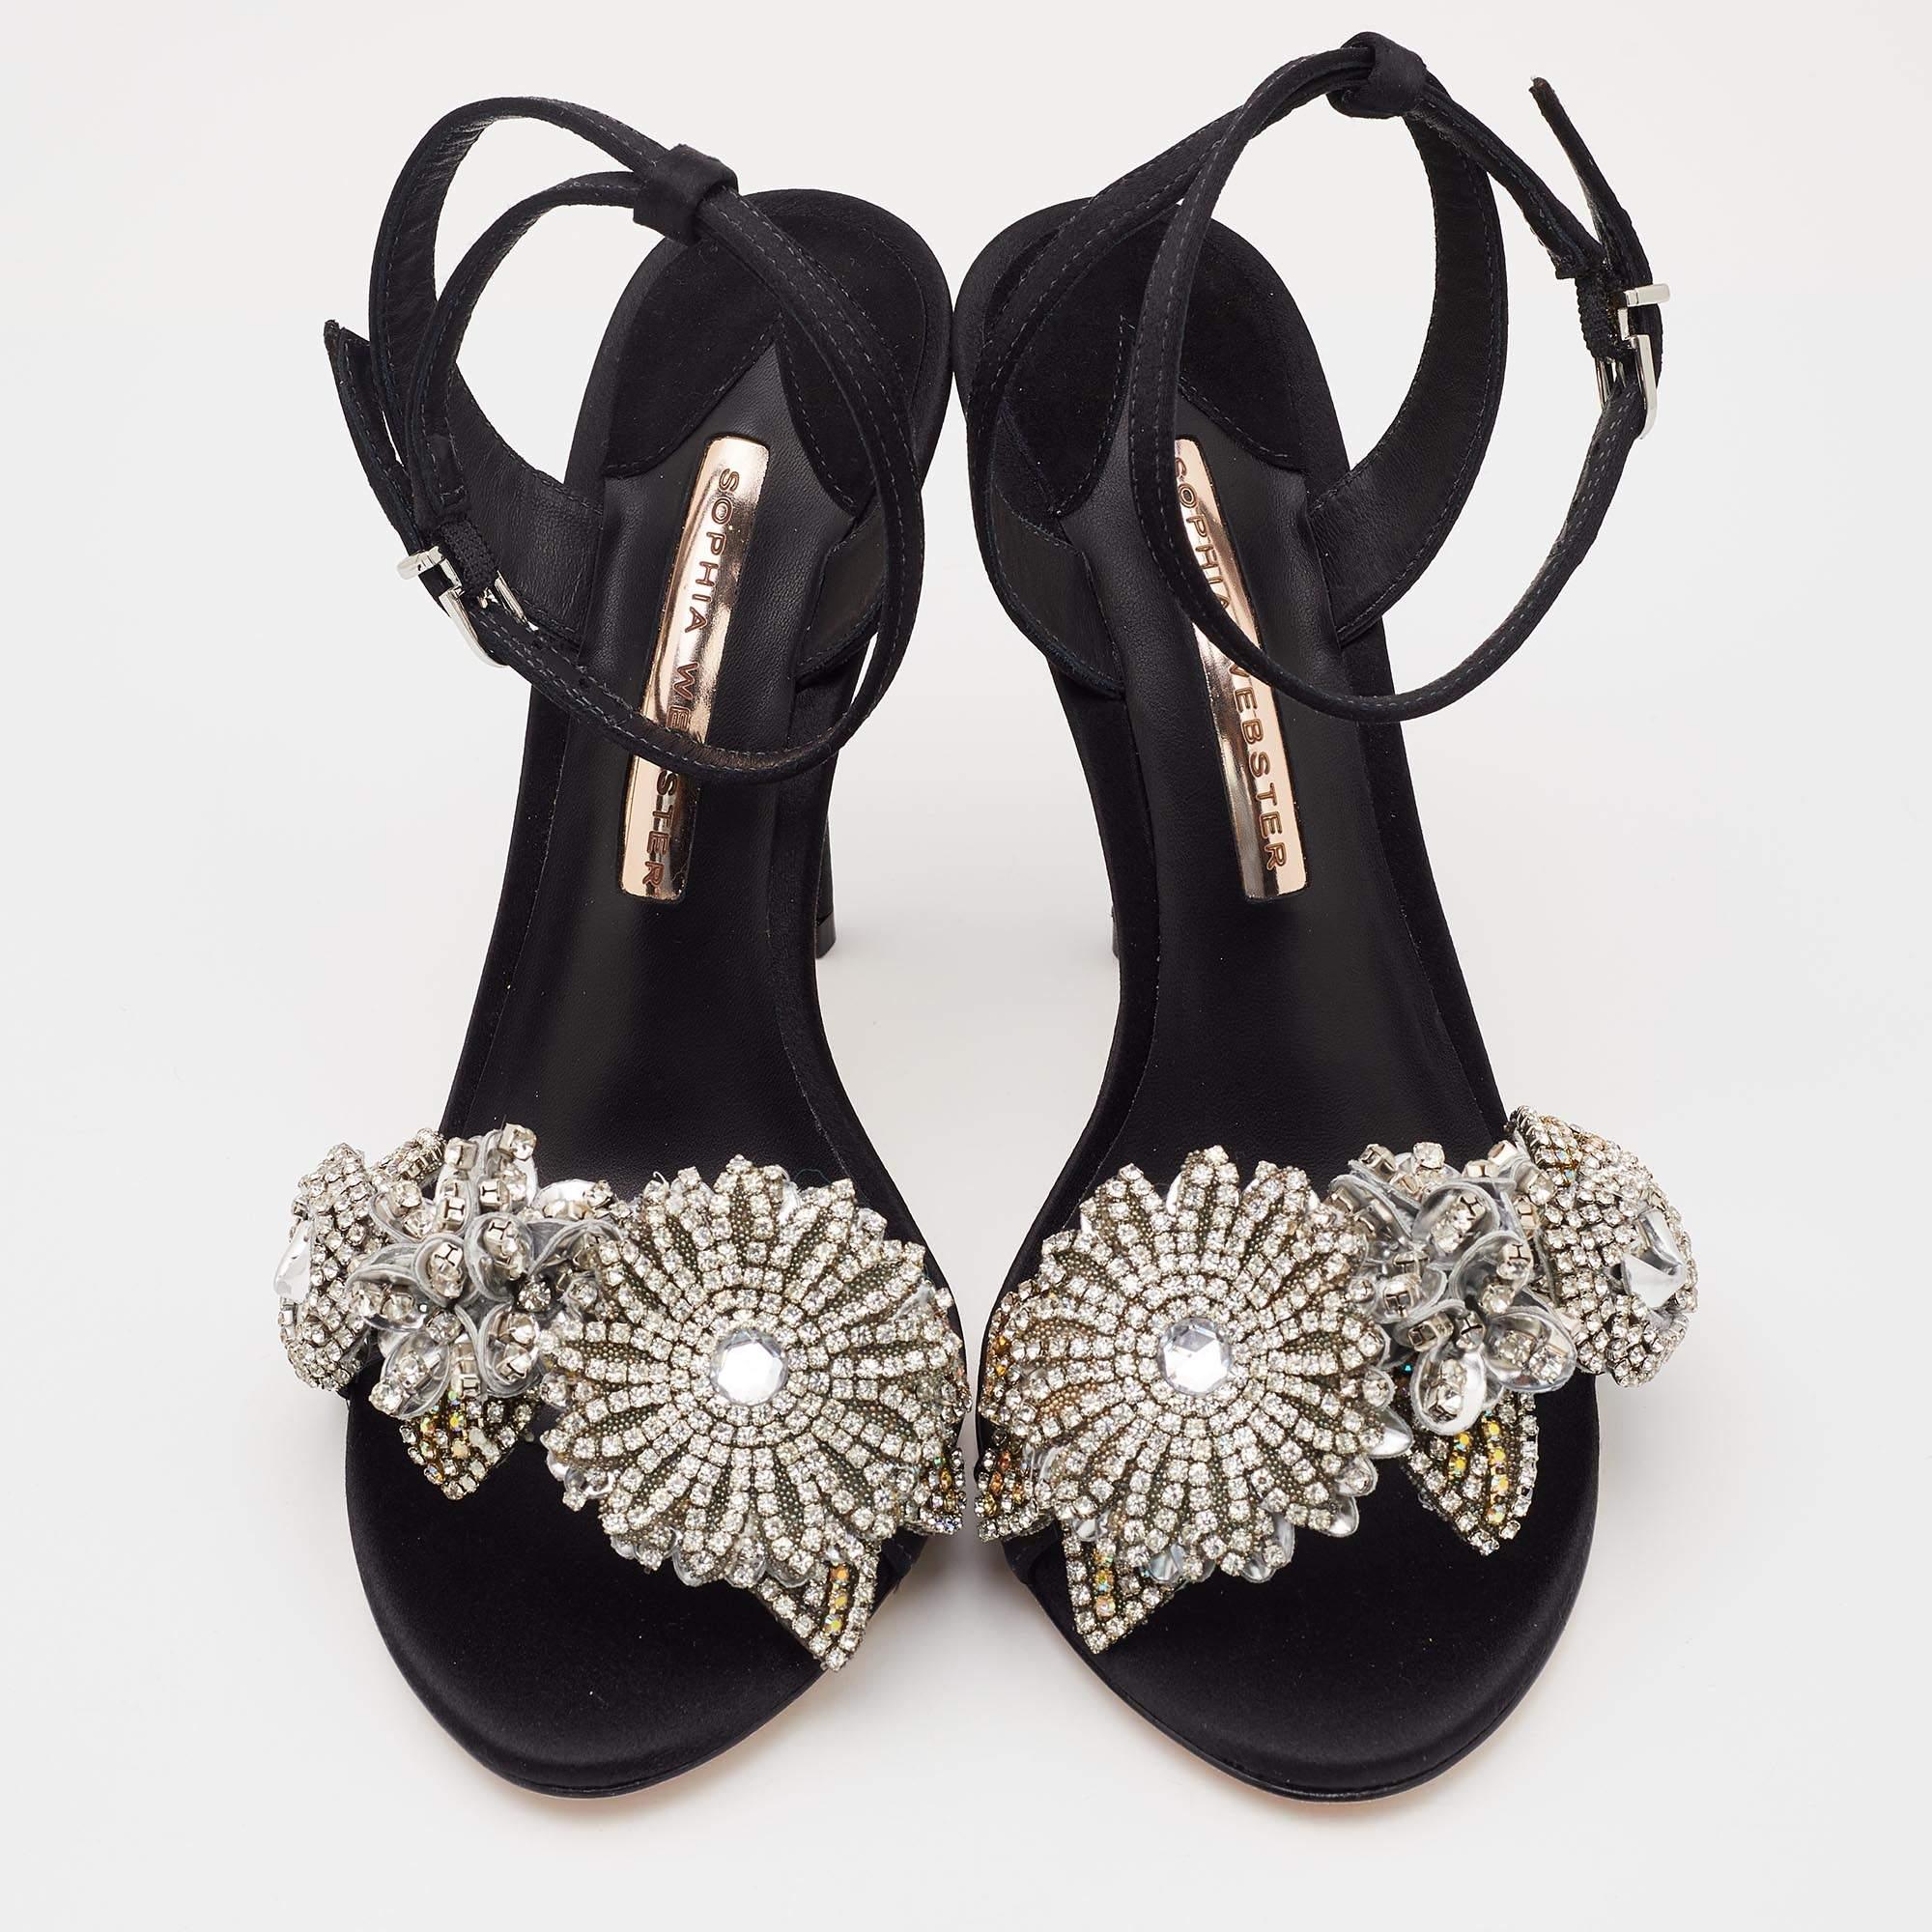 Create your own style statement with these fashionable sandals from Sophia Webster. These black sandals are crafted from satin and feature an open toe silhouette. They flaunt lovely flowers embellished on the vamp straps and come equipped with